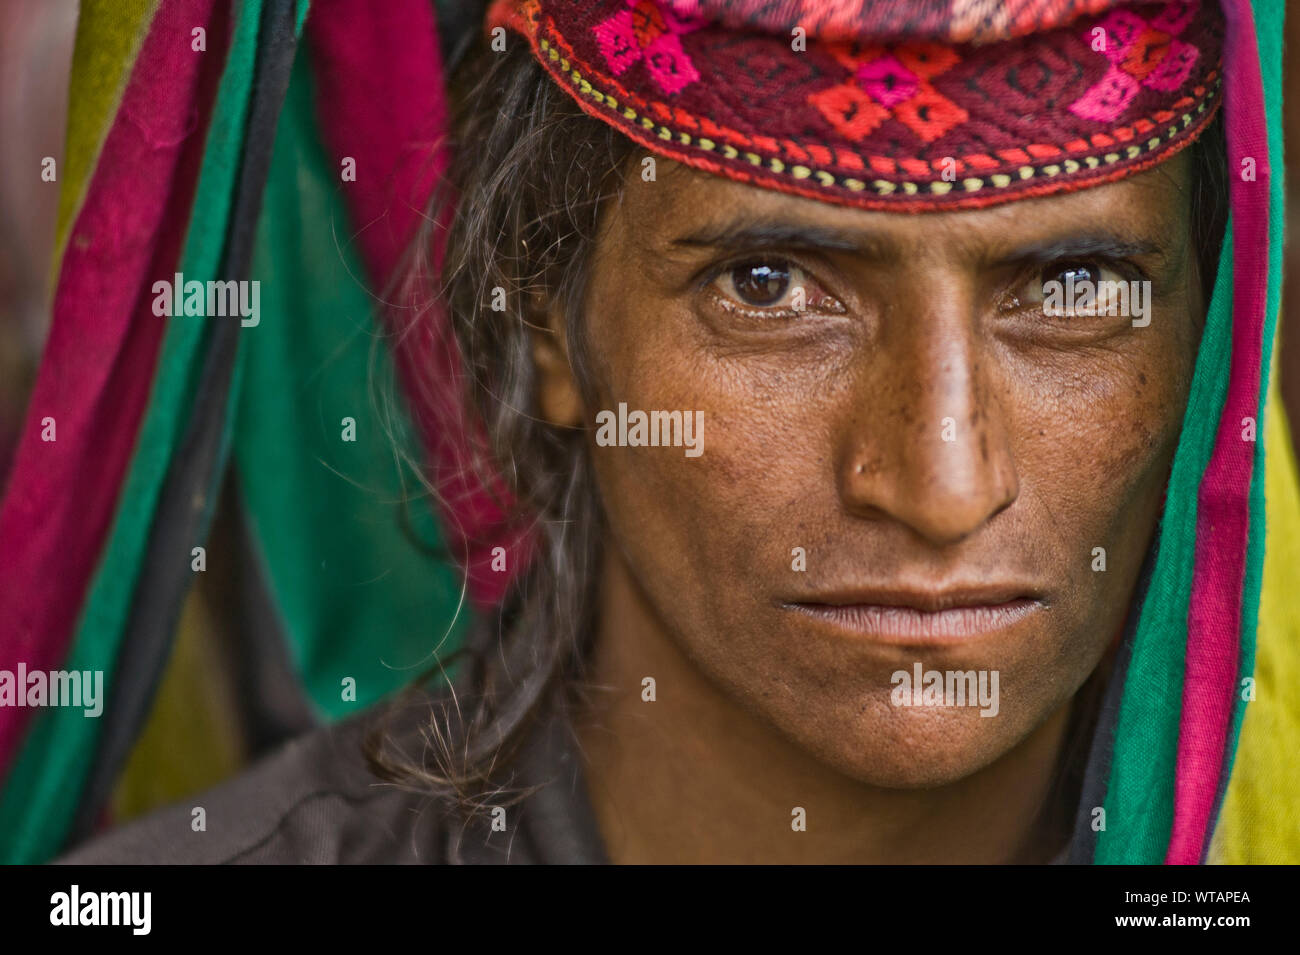 Gujjar woman wears traditional colorful clothes Stock Photo